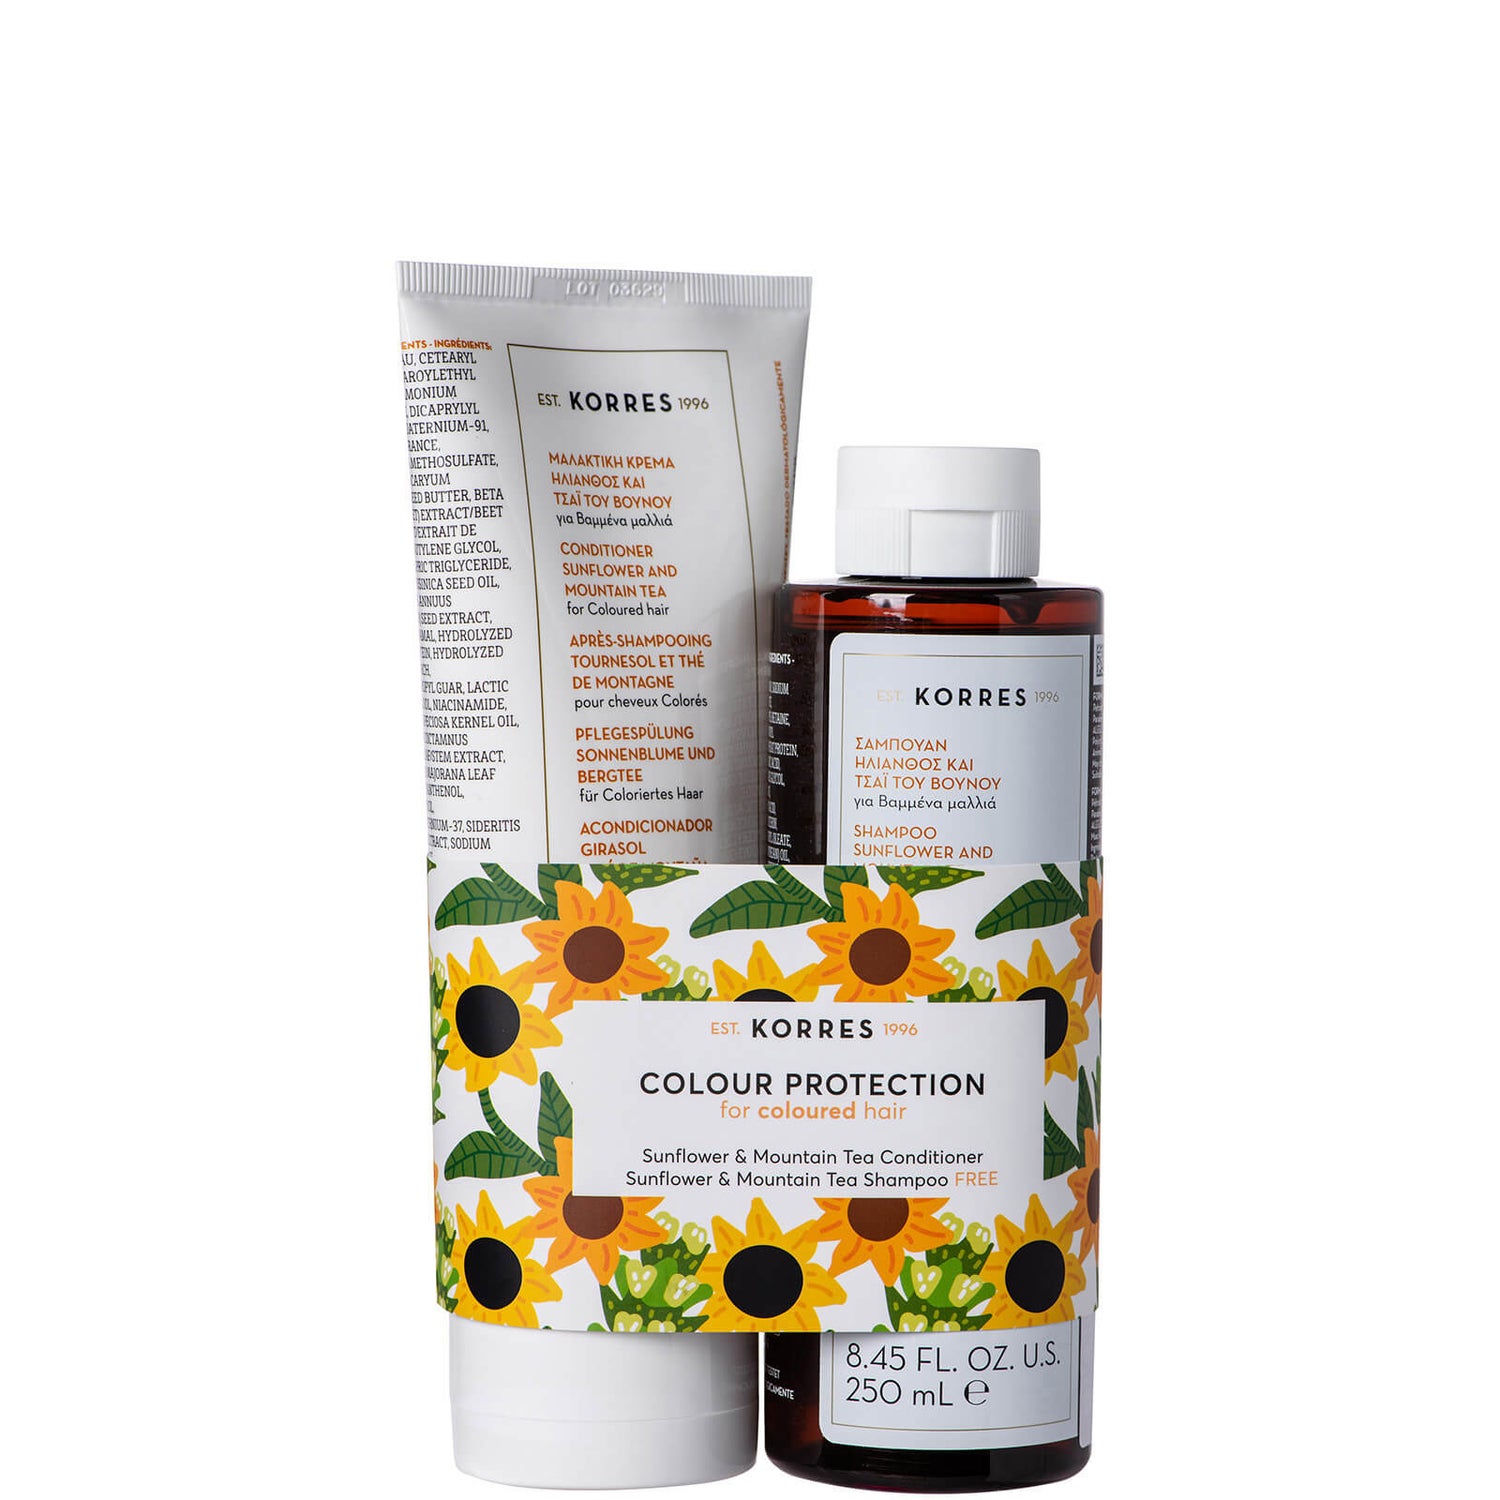 KORRES Sunflower & Mountain Tea Kit Conditioner and Shampoo Duo